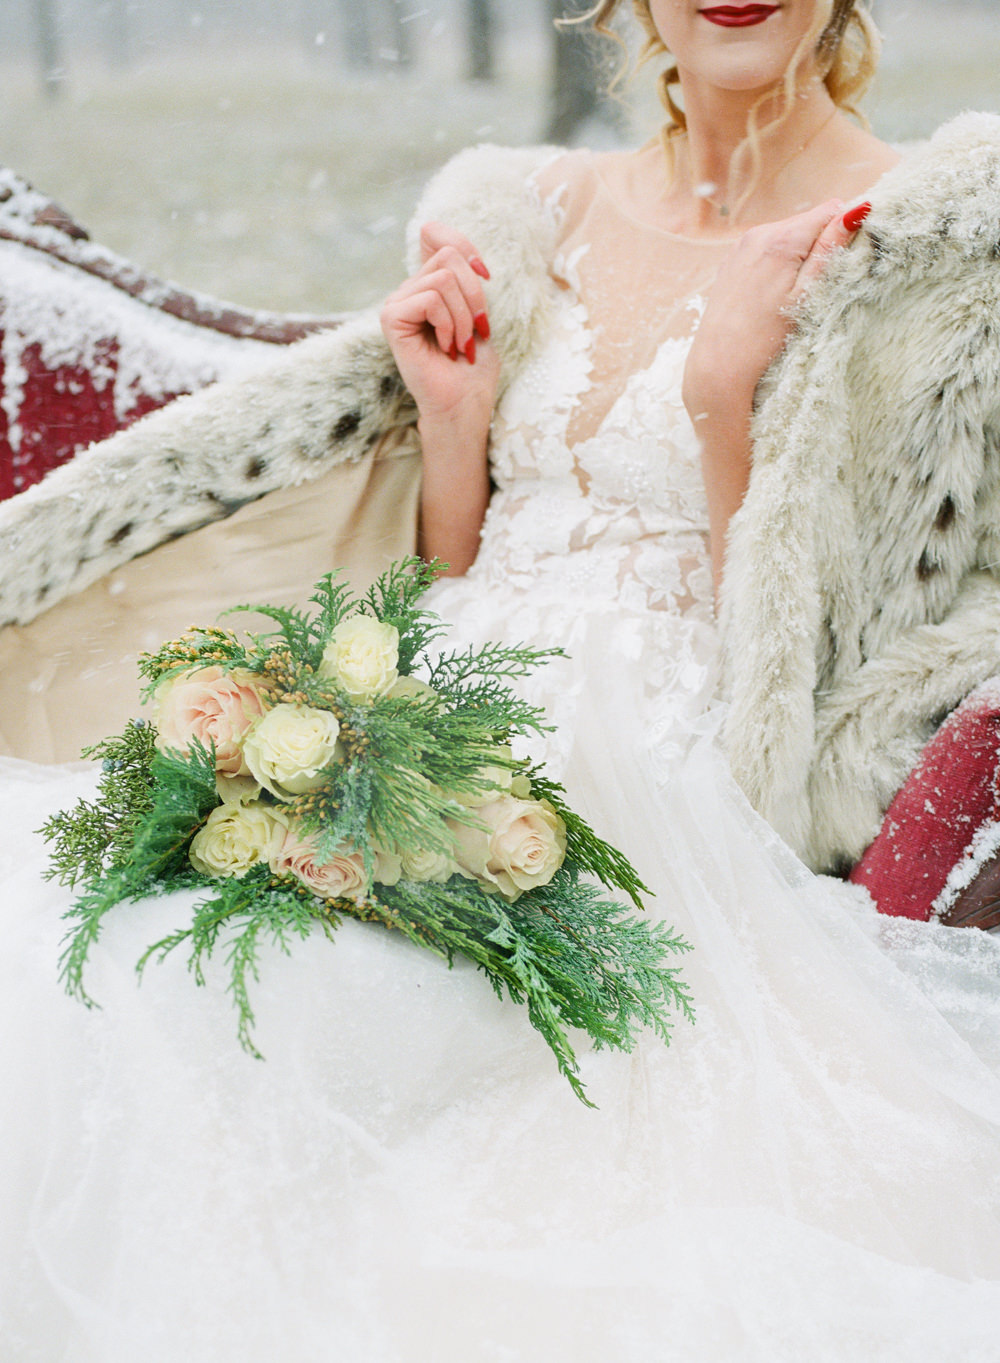 Winter wedding, Bride with fur coat on red couch in snow; St. Louis fine art film wedding photographer Erica Robnett Photography